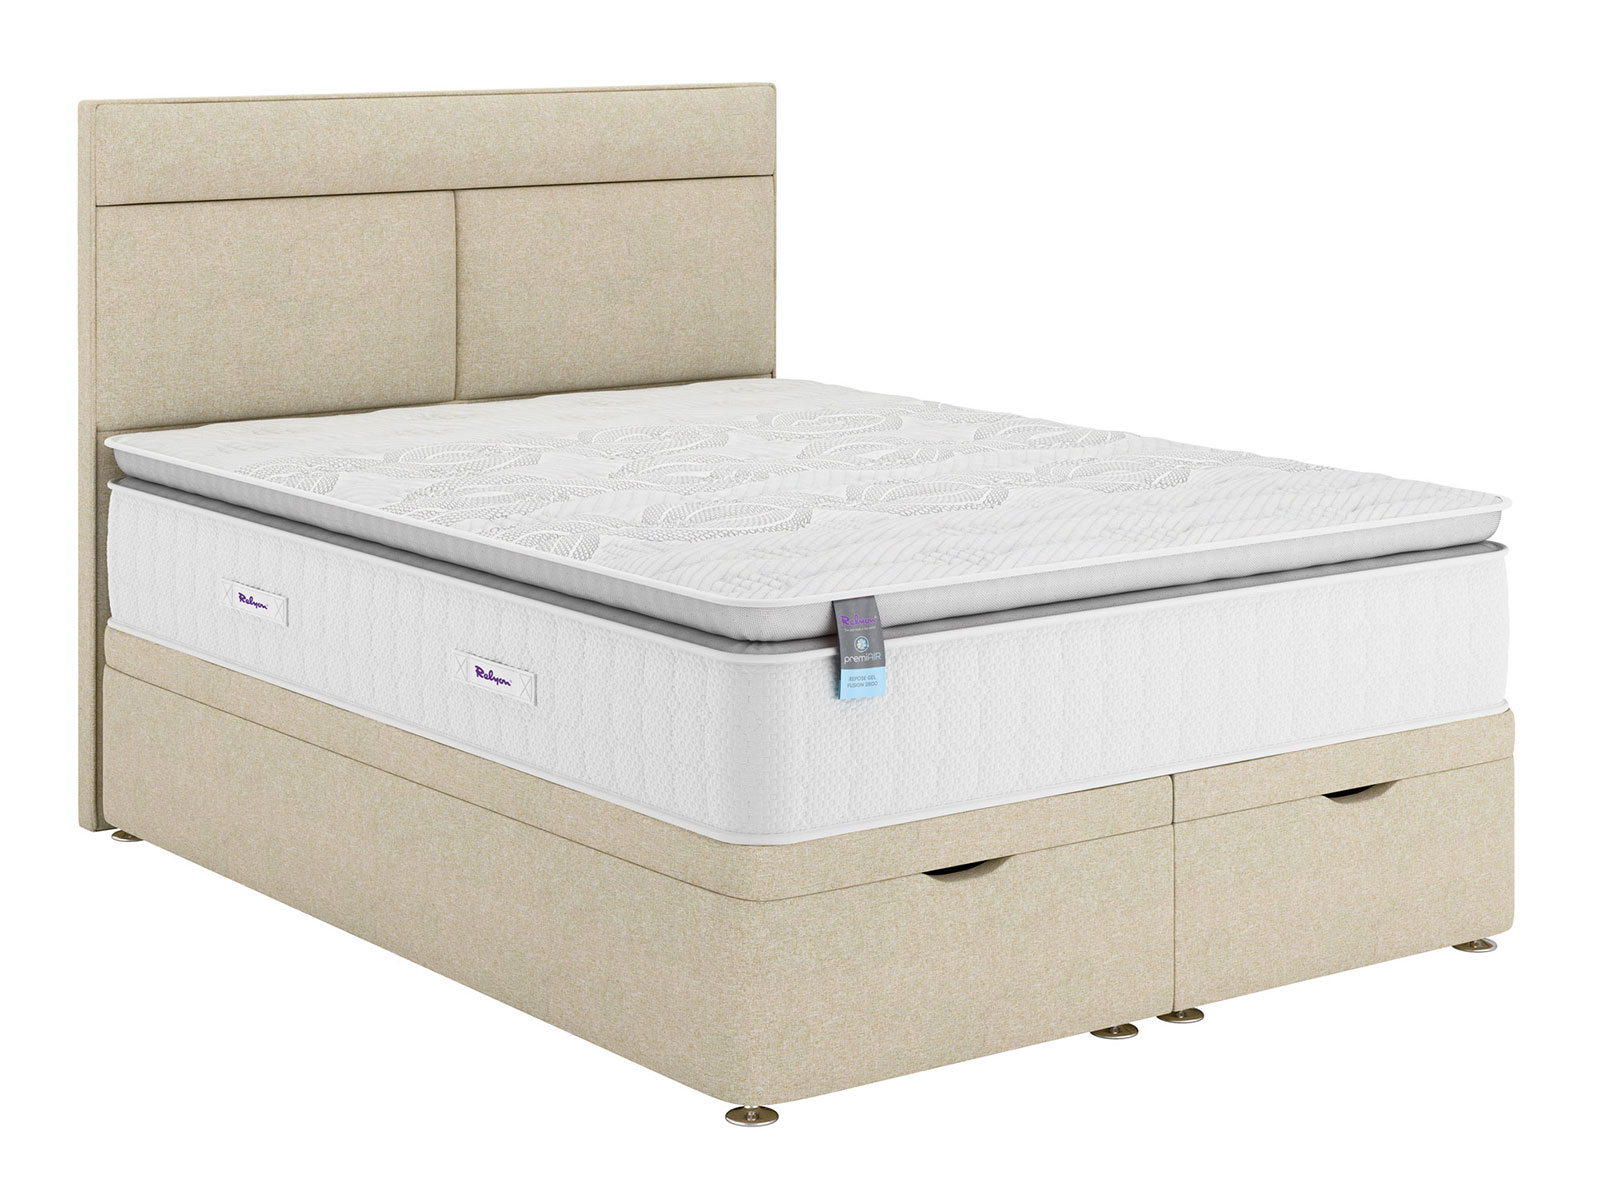 5ft King SIze Relyon Contemporary Gel Fusion 2800 Mattress